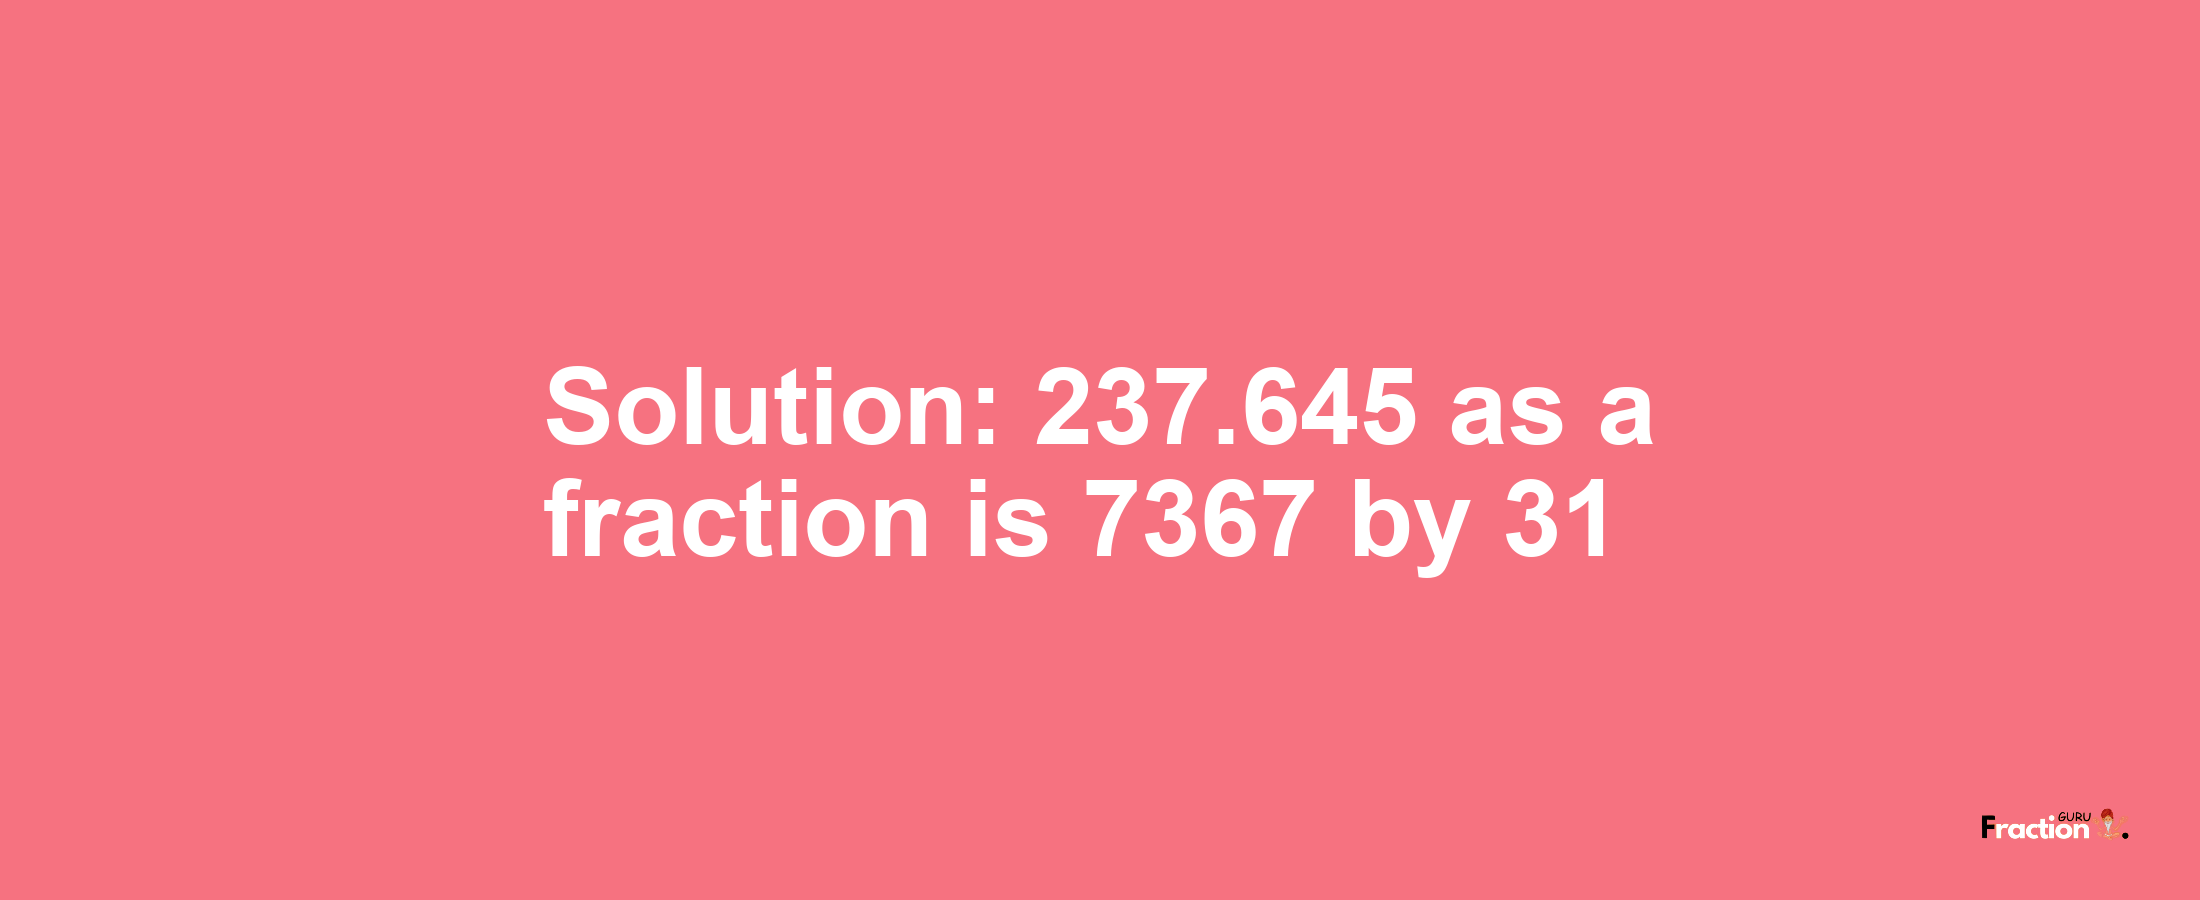 Solution:237.645 as a fraction is 7367/31